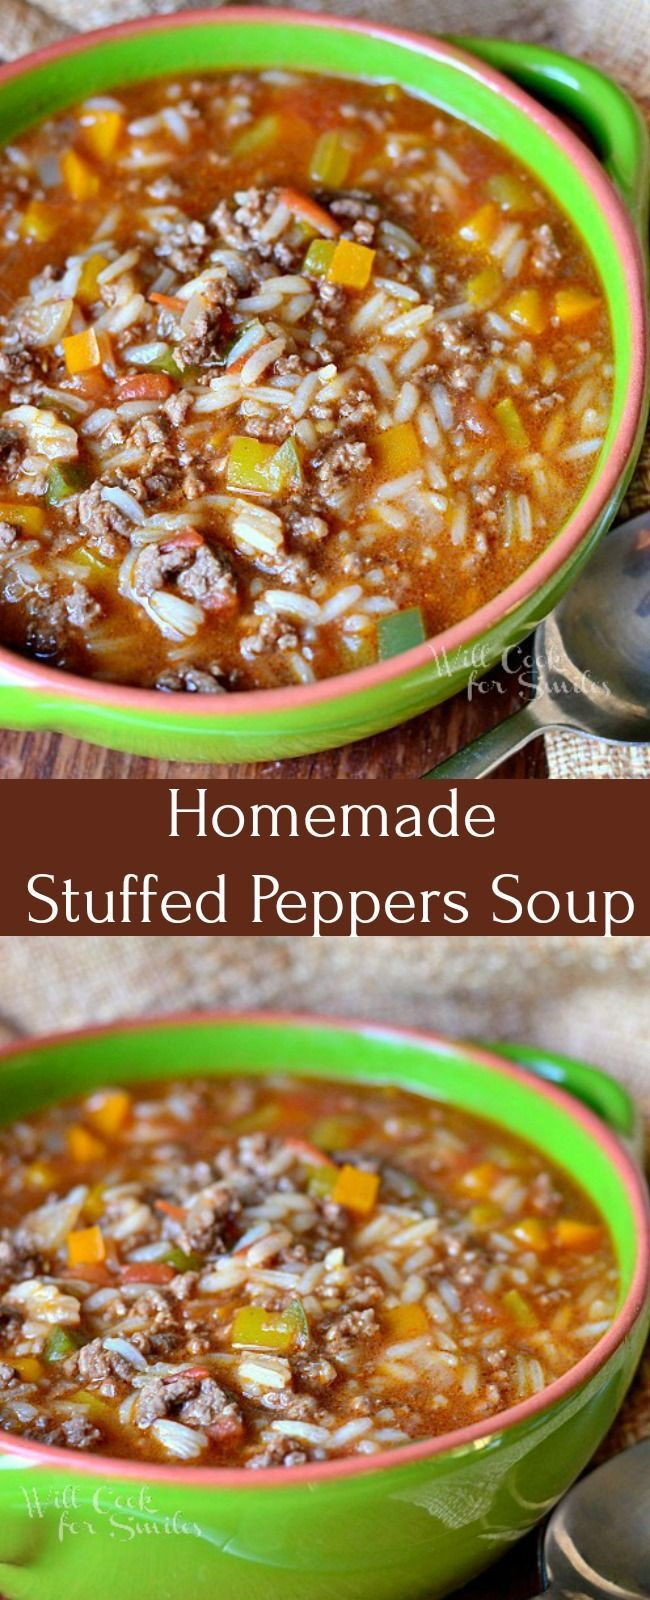 Recipes Using Baby Food Meat
 forting Homemade Stuffed Peppers Soup recipe made with